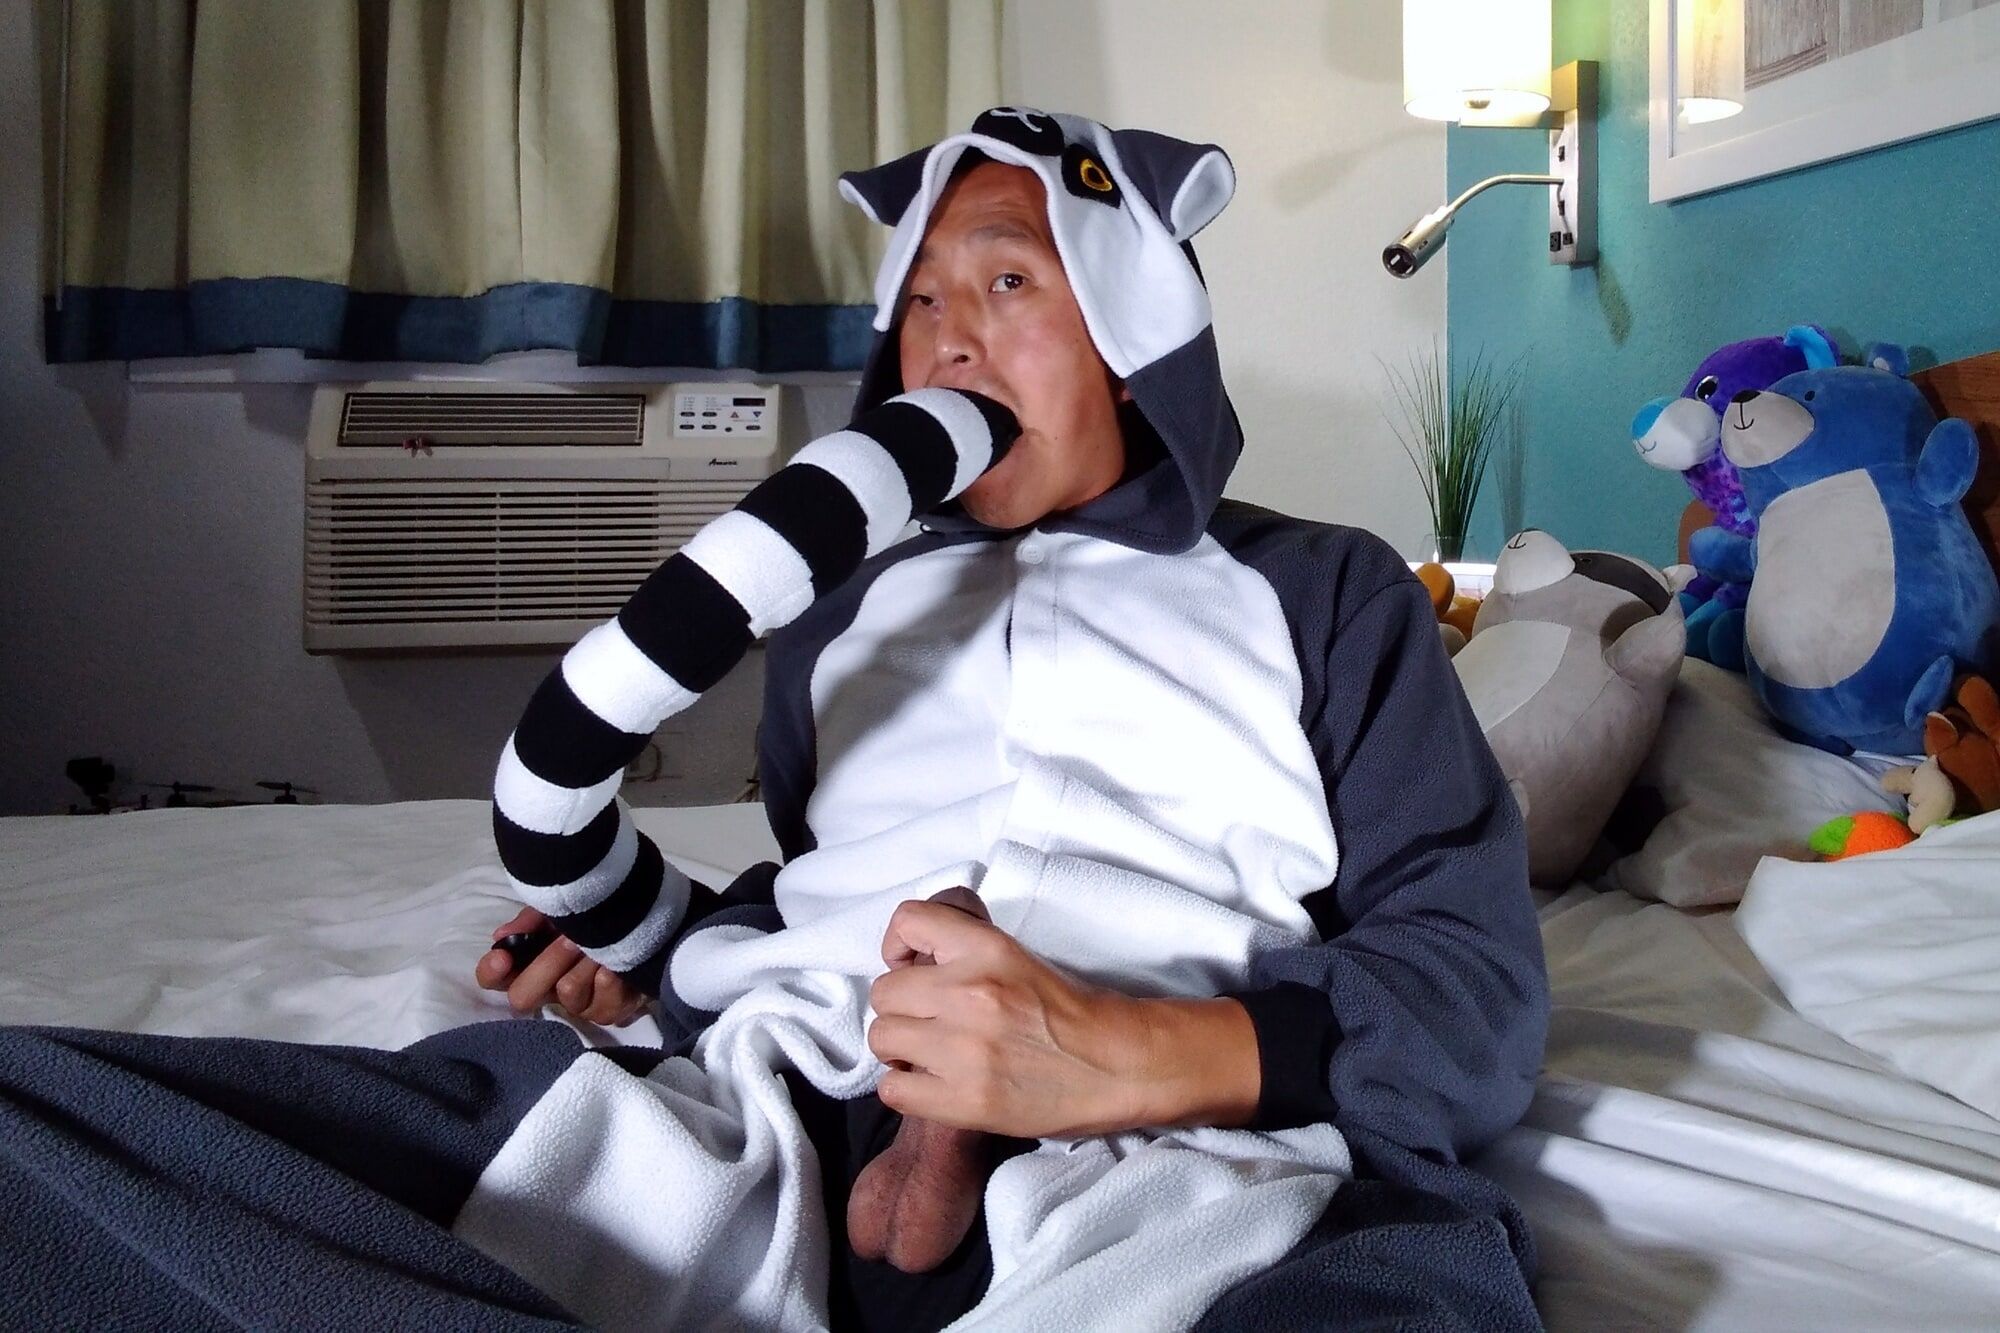 Hot asian boy wearing furry onesies and shiny undies #25